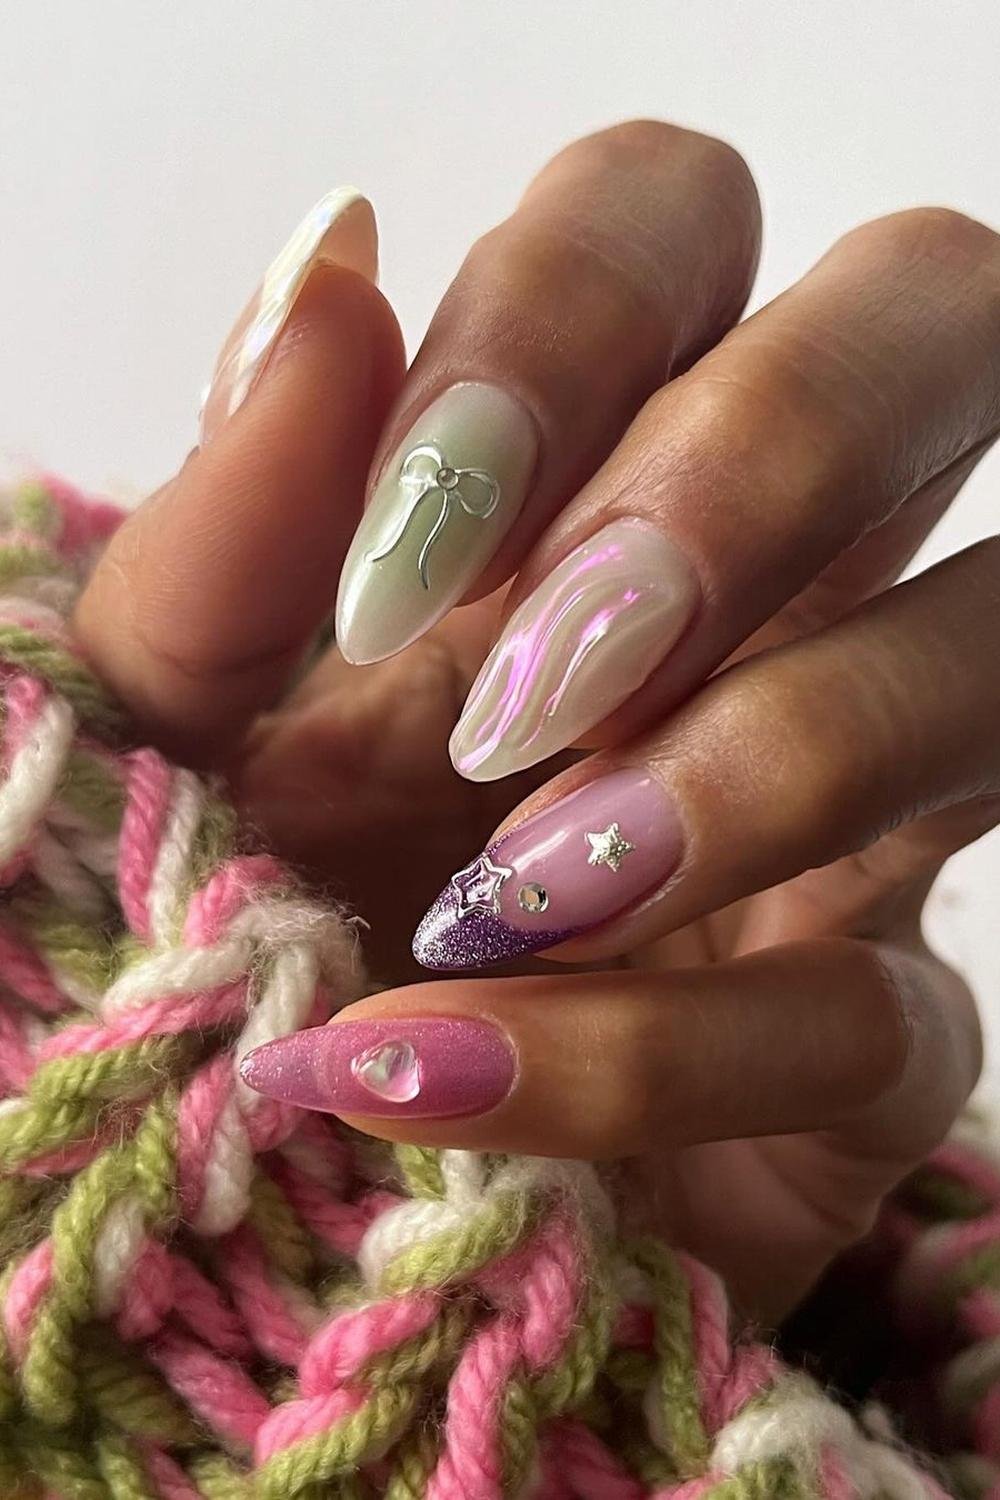 5 - Picture of Whimsical Nails